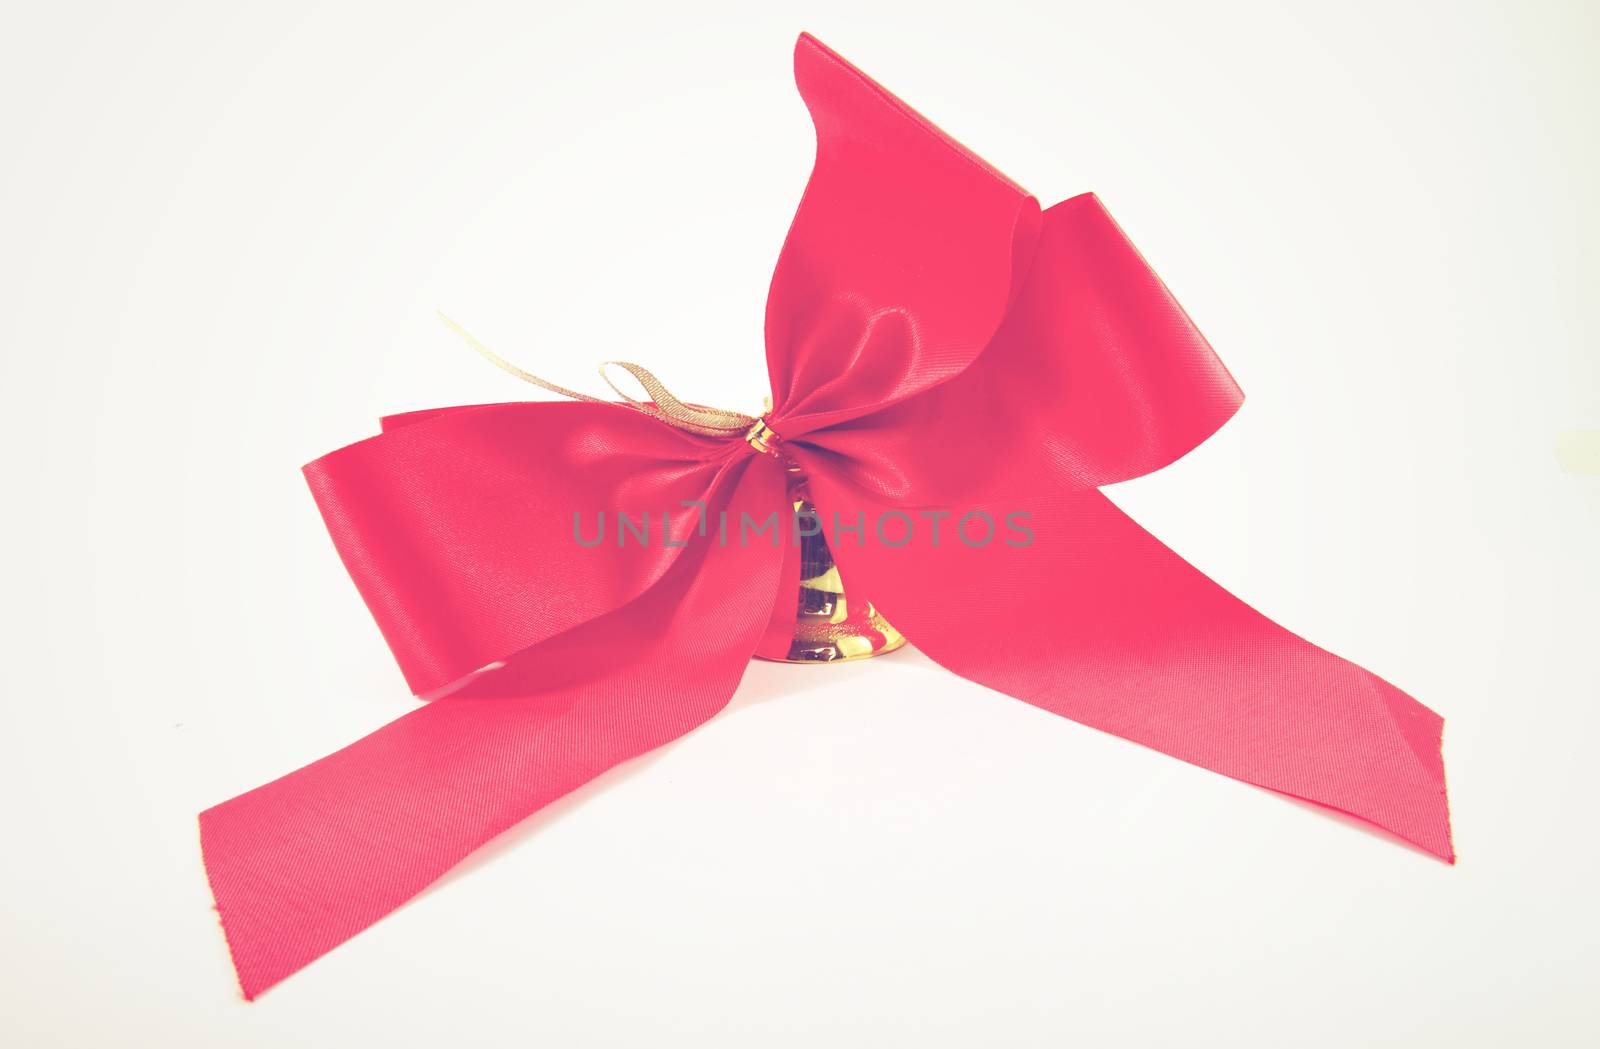 Red satin ribbon and golden bell with retro filter effect by nuchylee